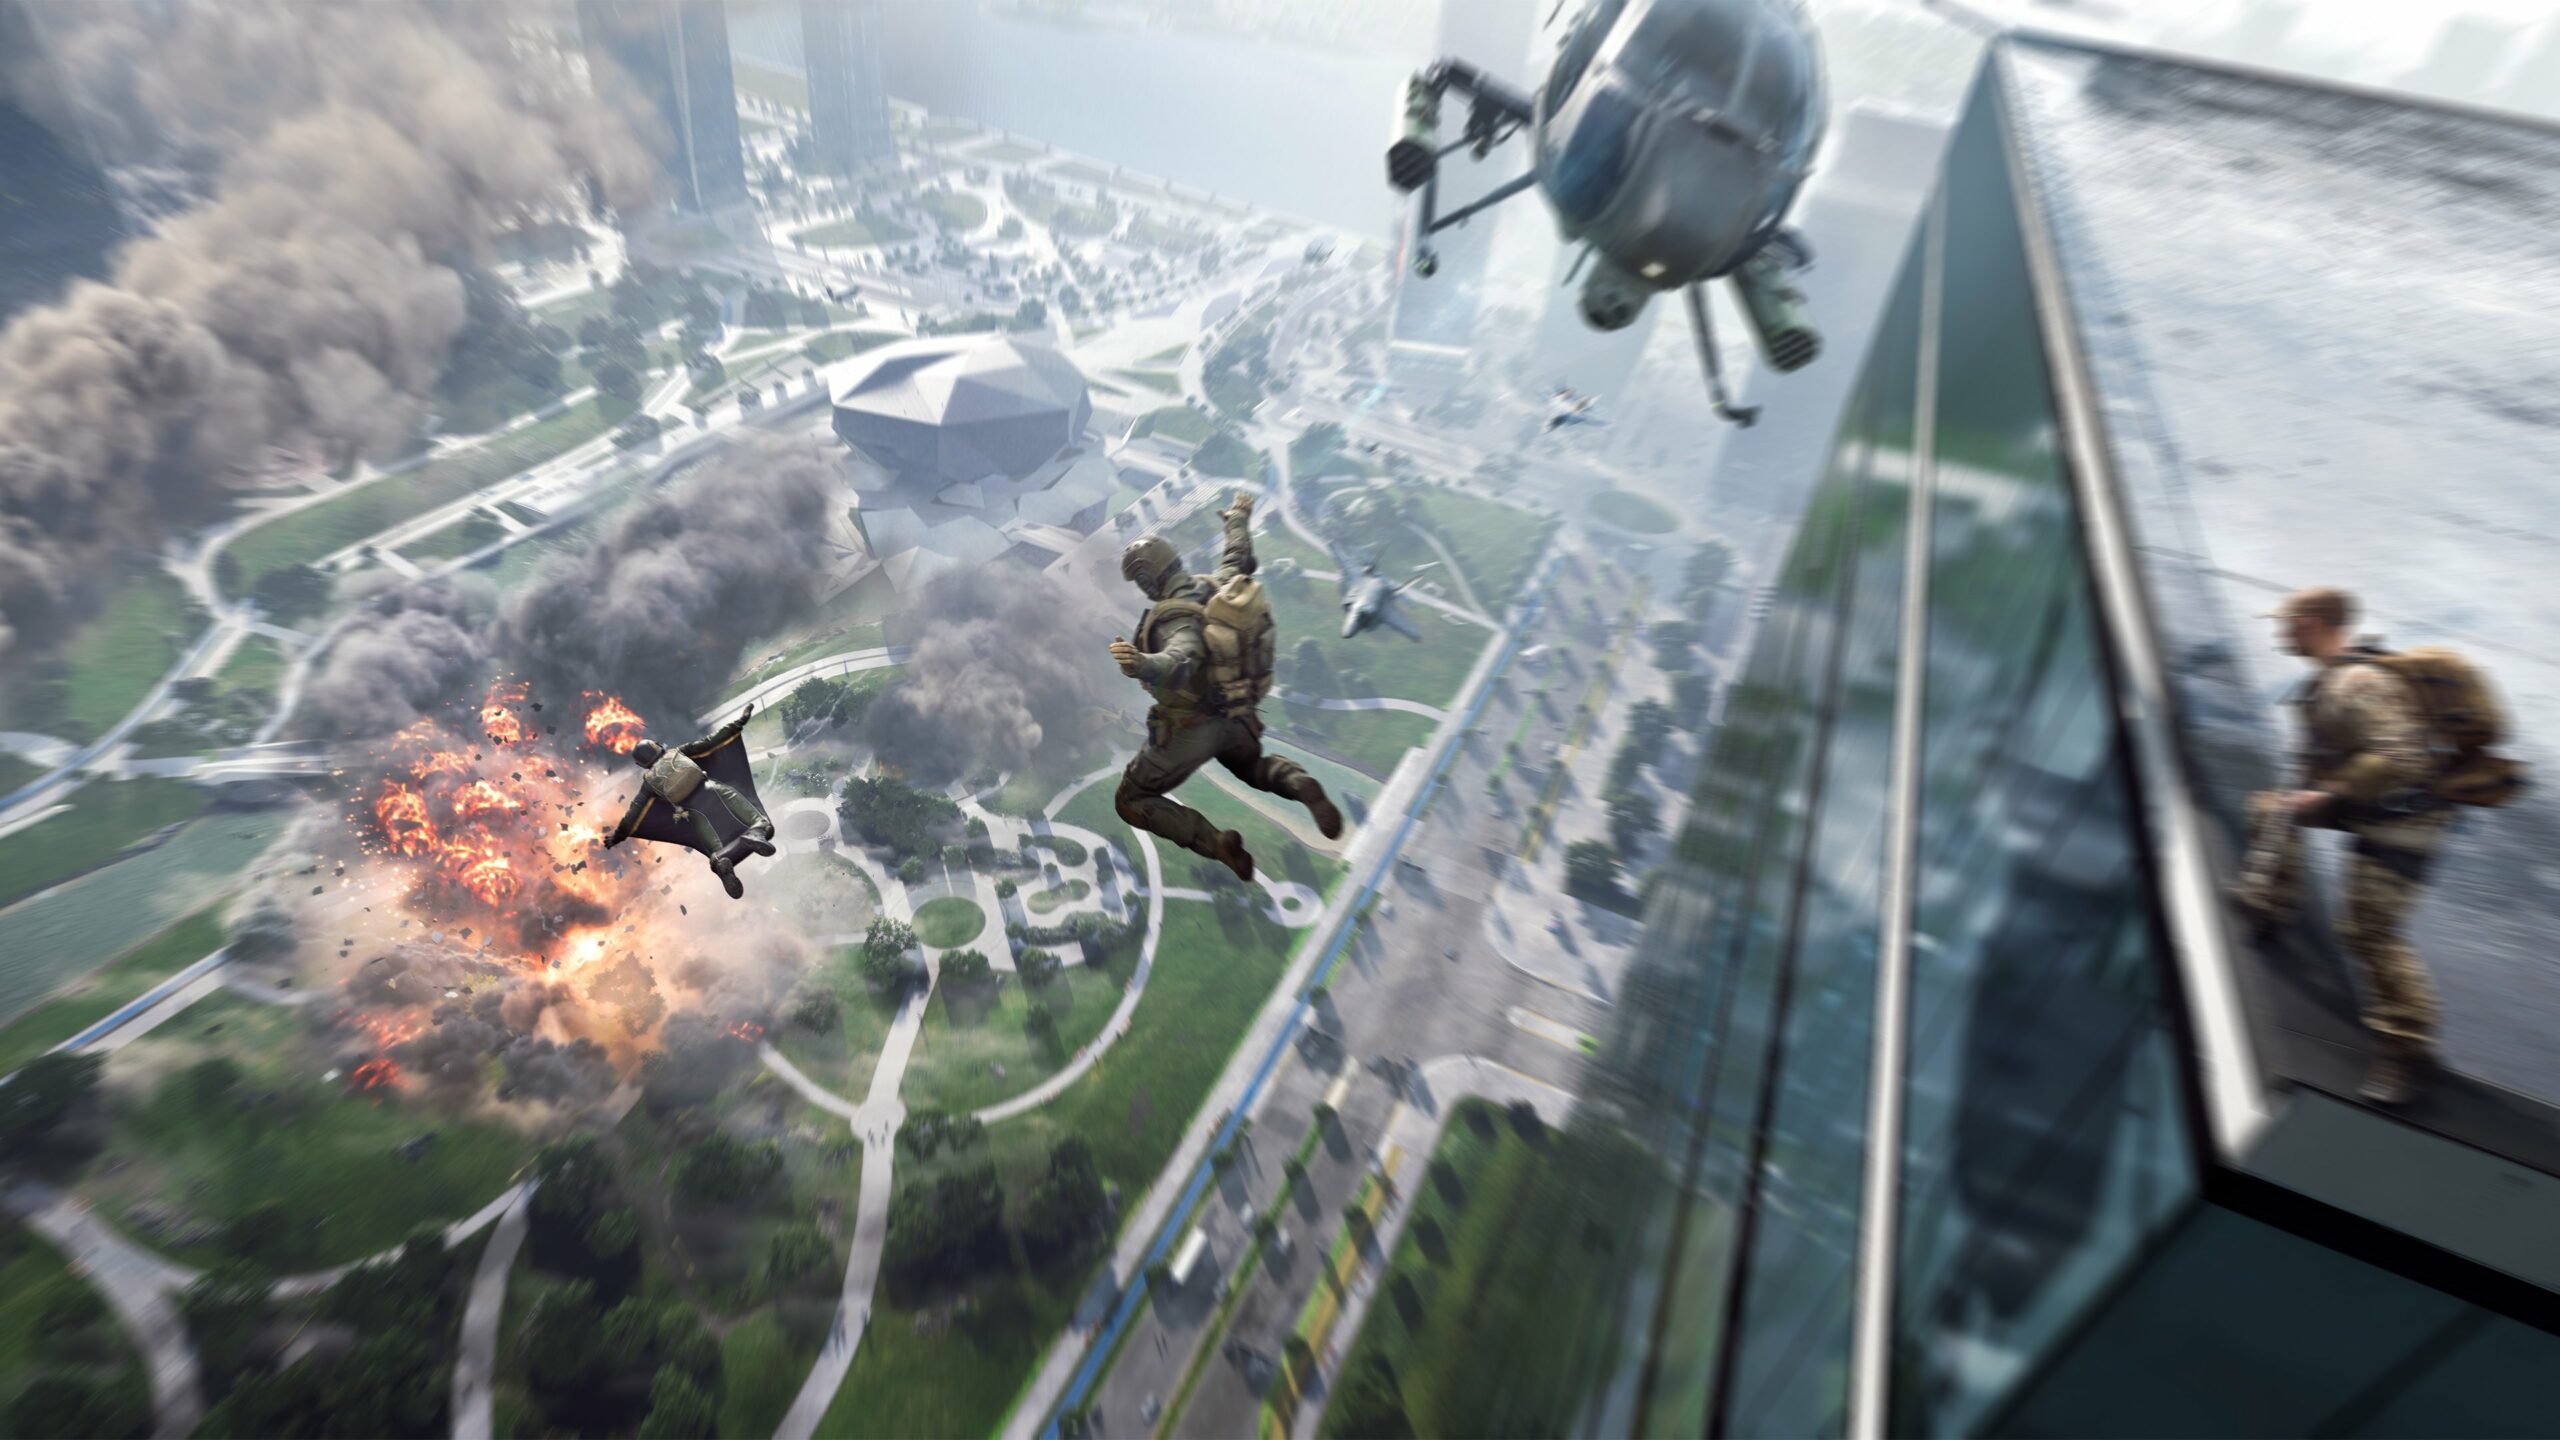 EA reveals Battlefield 2042 system requirements and open beta dates -   News